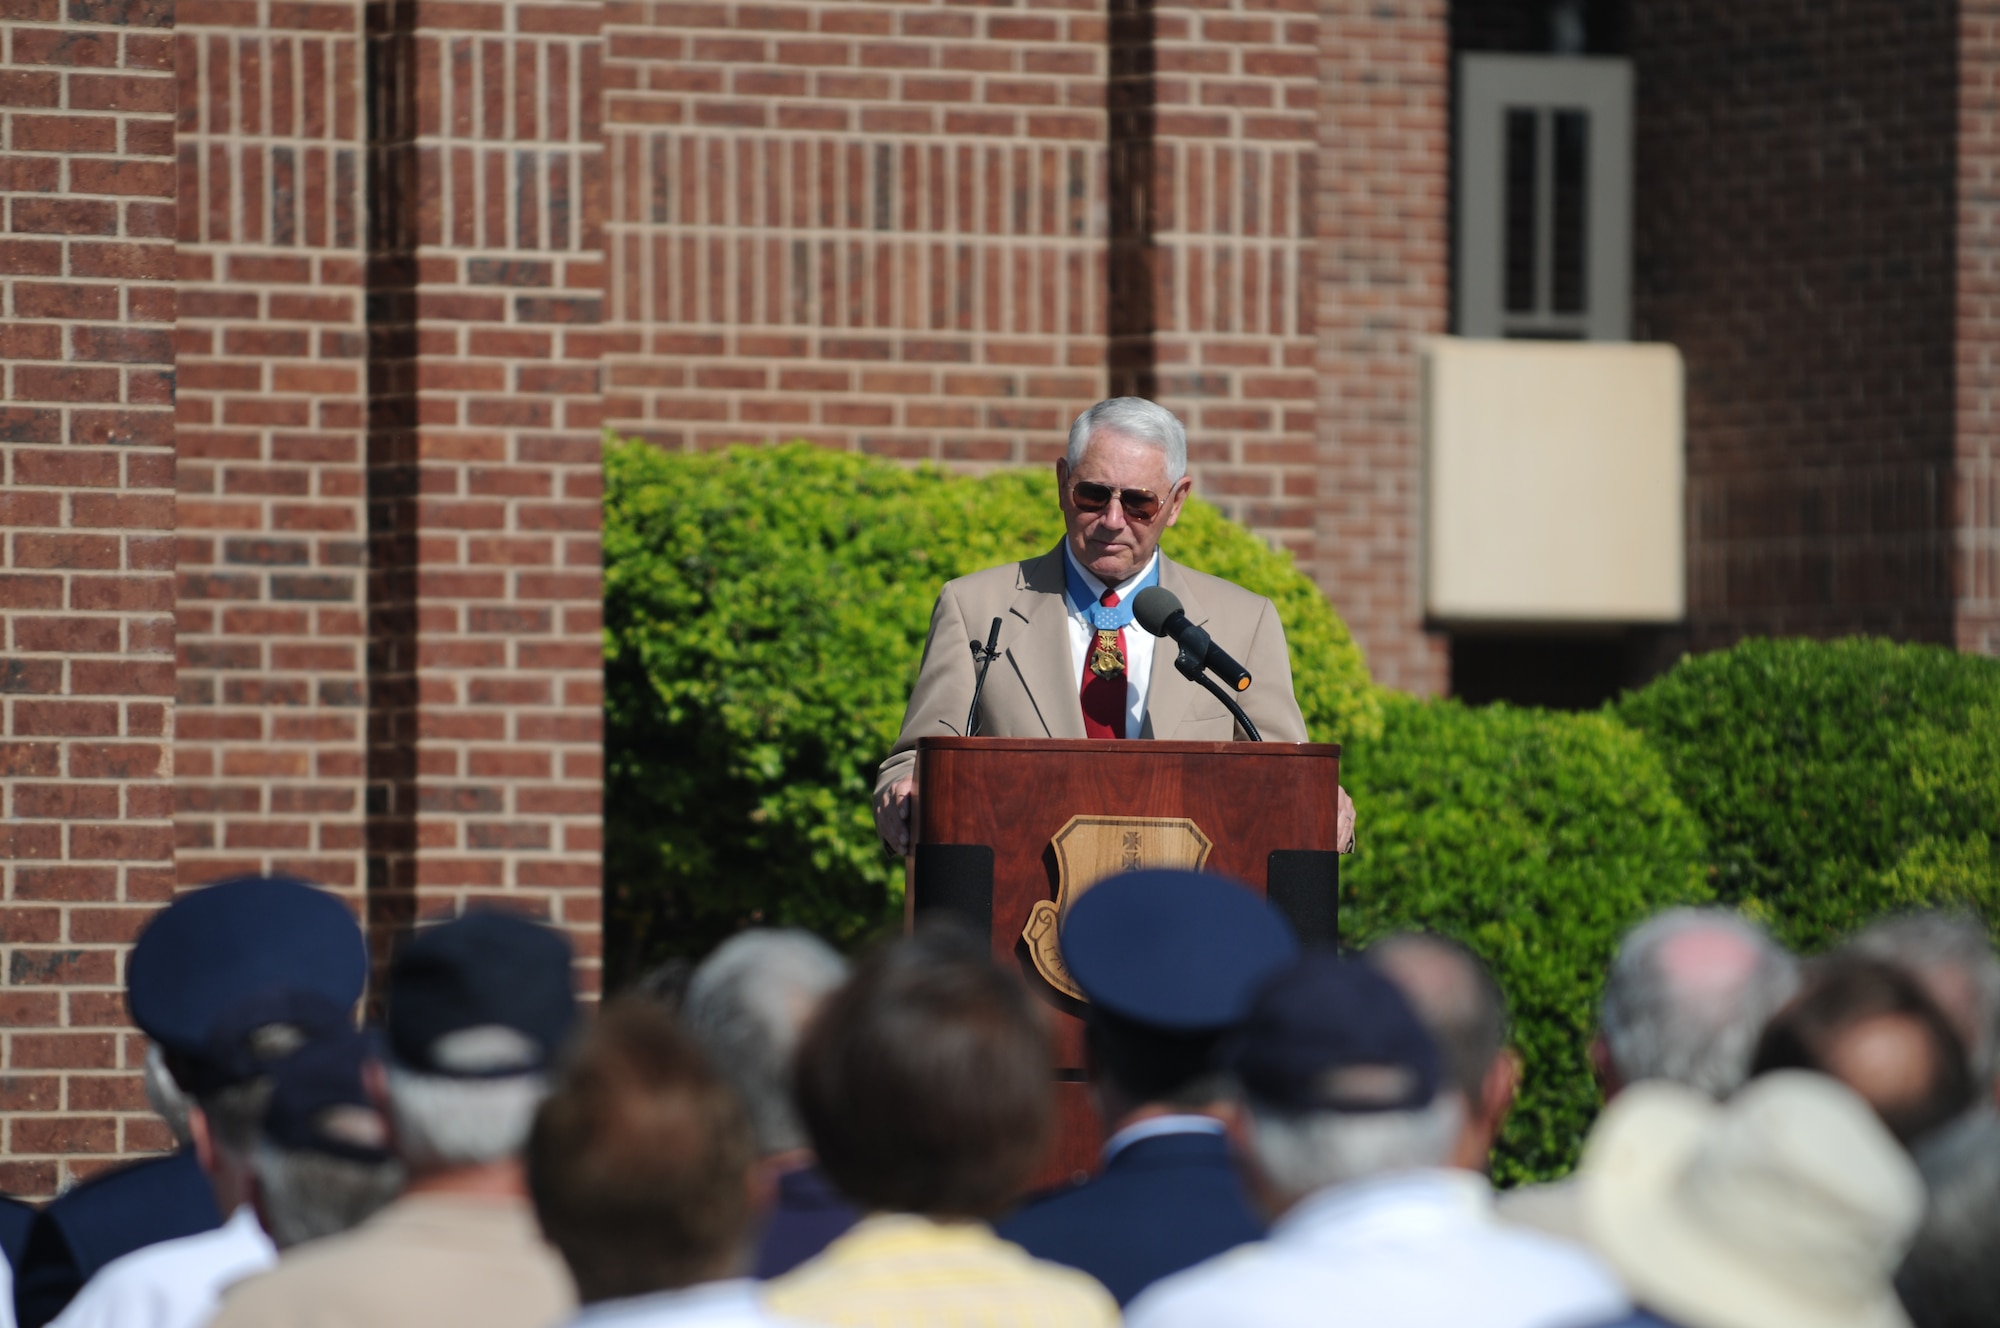 GOODFELLOW AIR FORCE BASE, Texas -- Medal of Honor recipient, retired Col. Leo K. Thorsness speaks at a building dedication ceremony, May 7, 2010. Two Visiting Officer Quarters were named in honor of Colonels Thorsness and George E. “Bud” Day. Both Air Force officers received the Medal of Honor for actions while serving in Vietnam. (U.S. Air Force photo/Airman 1st Class Clayton Lenhardt)